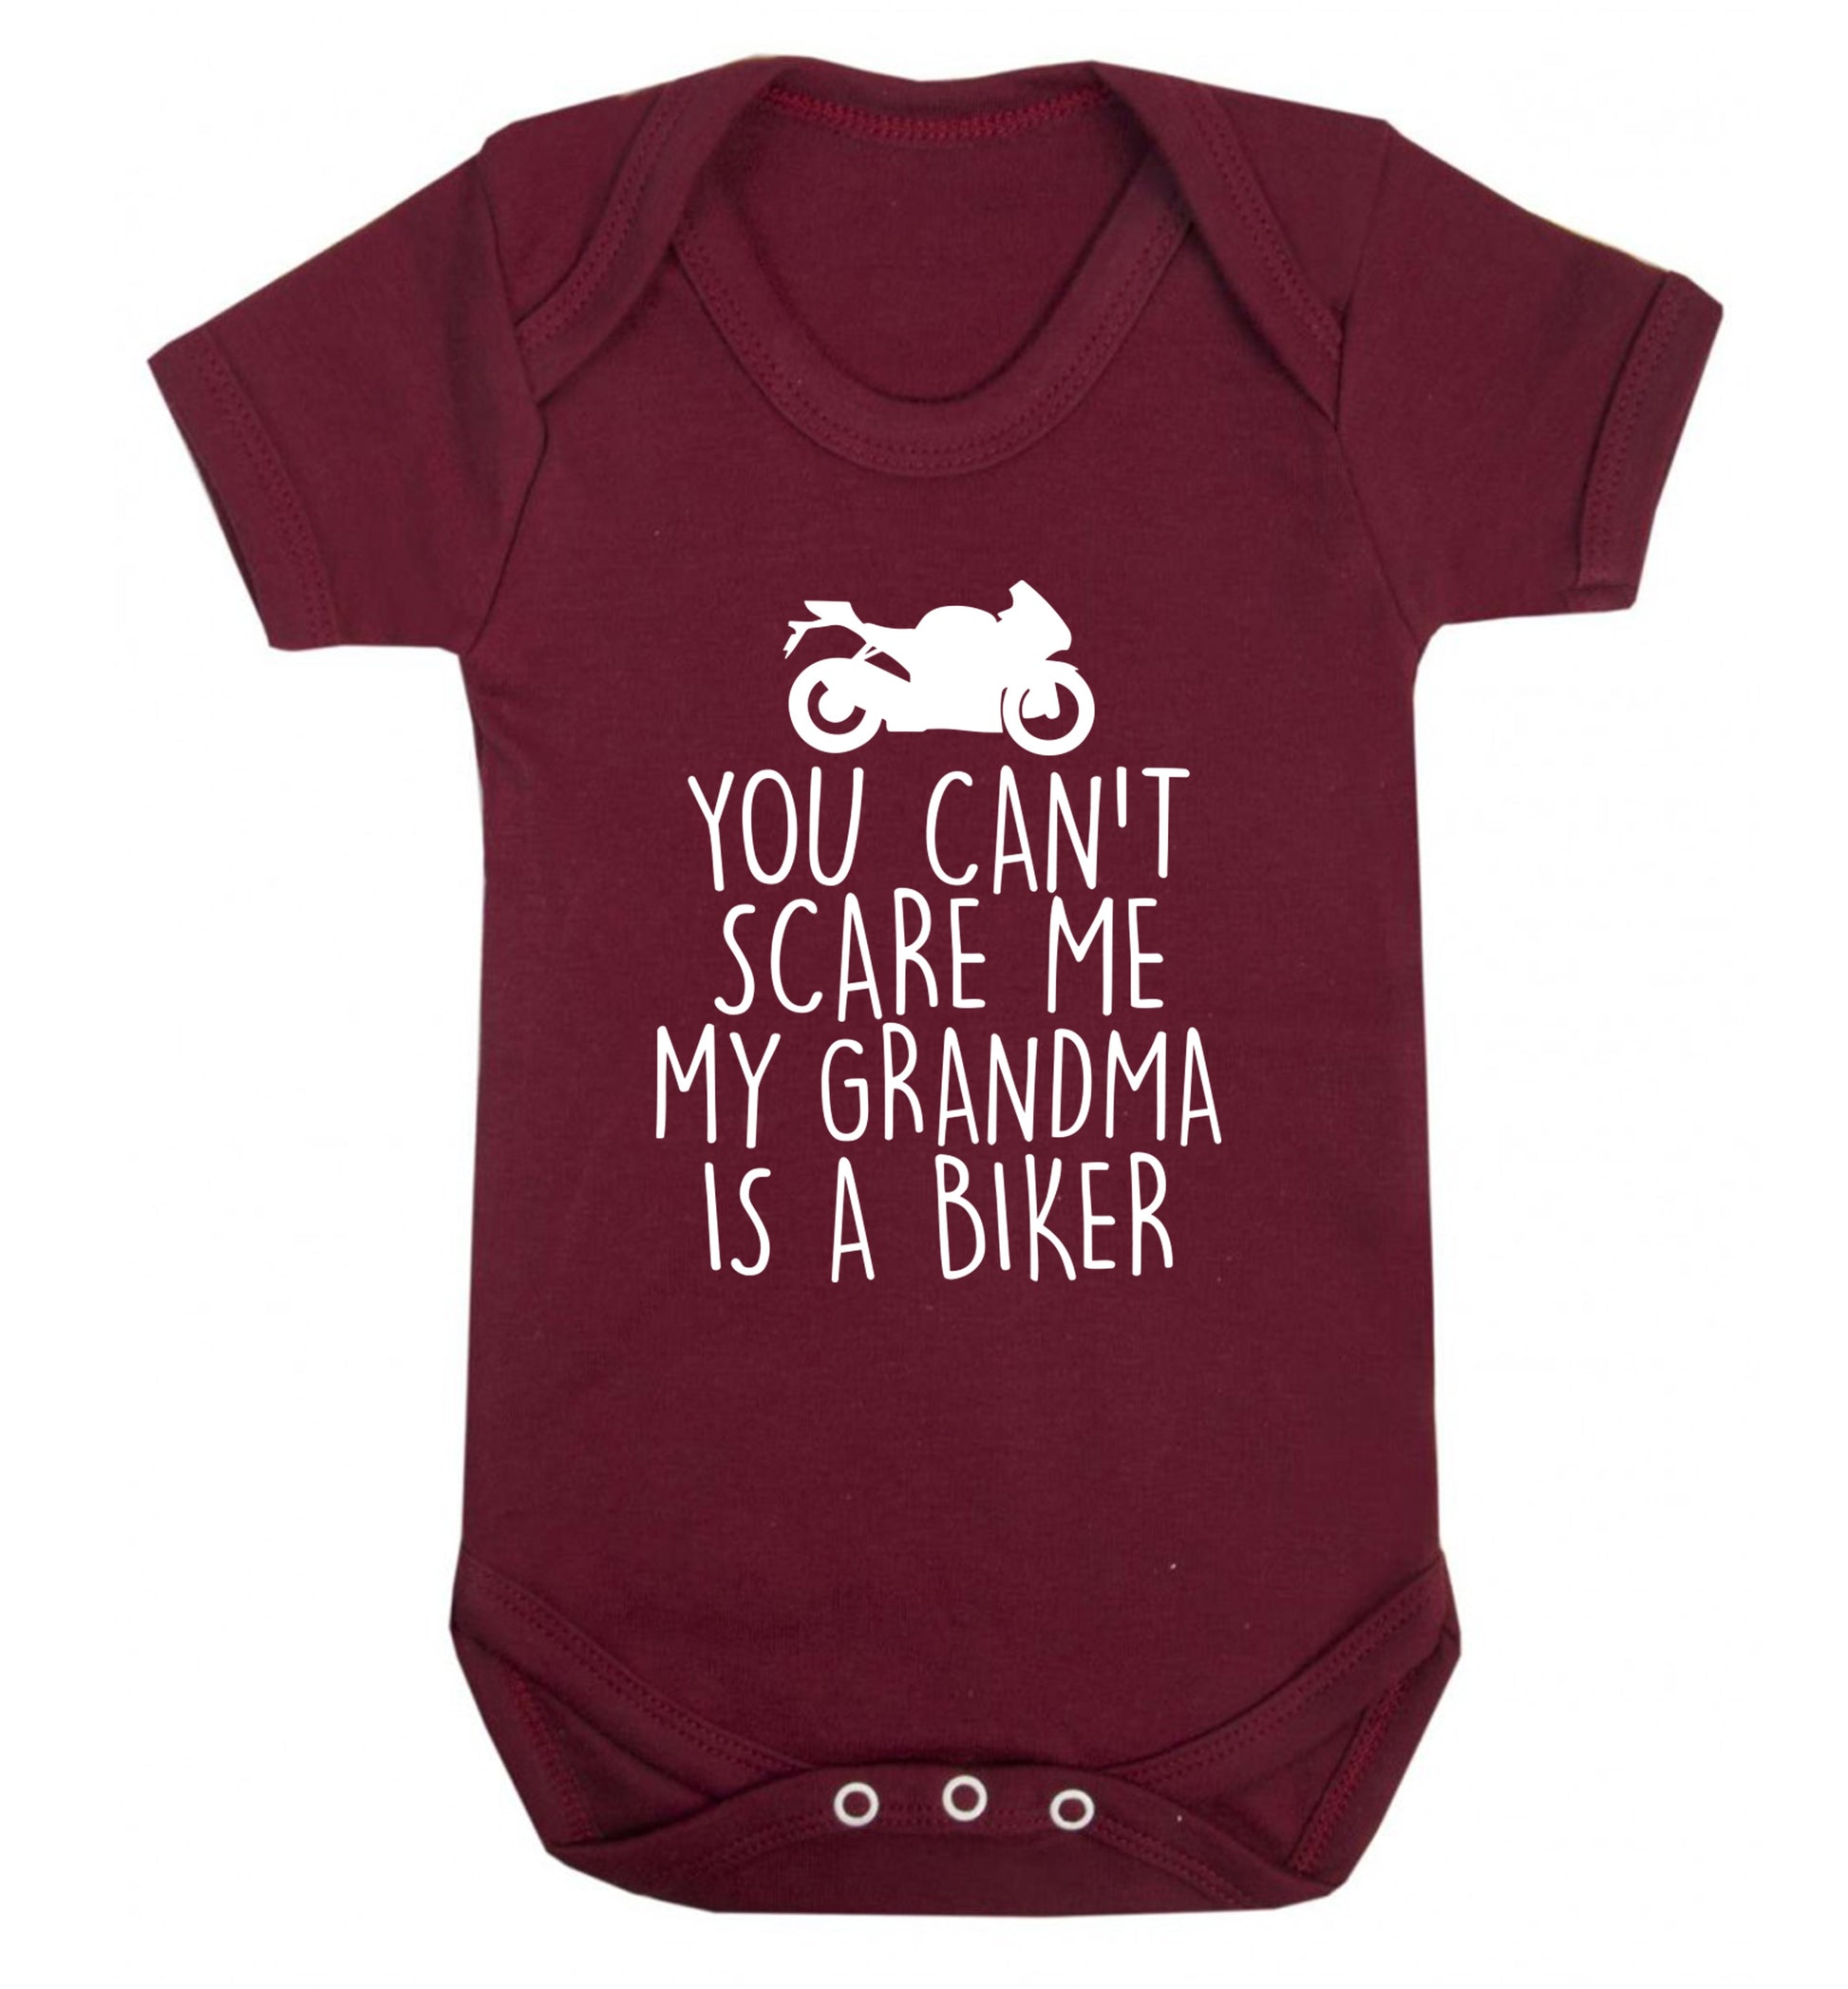 You can't scare me my grandma is a biker Baby Vest maroon 18-24 months